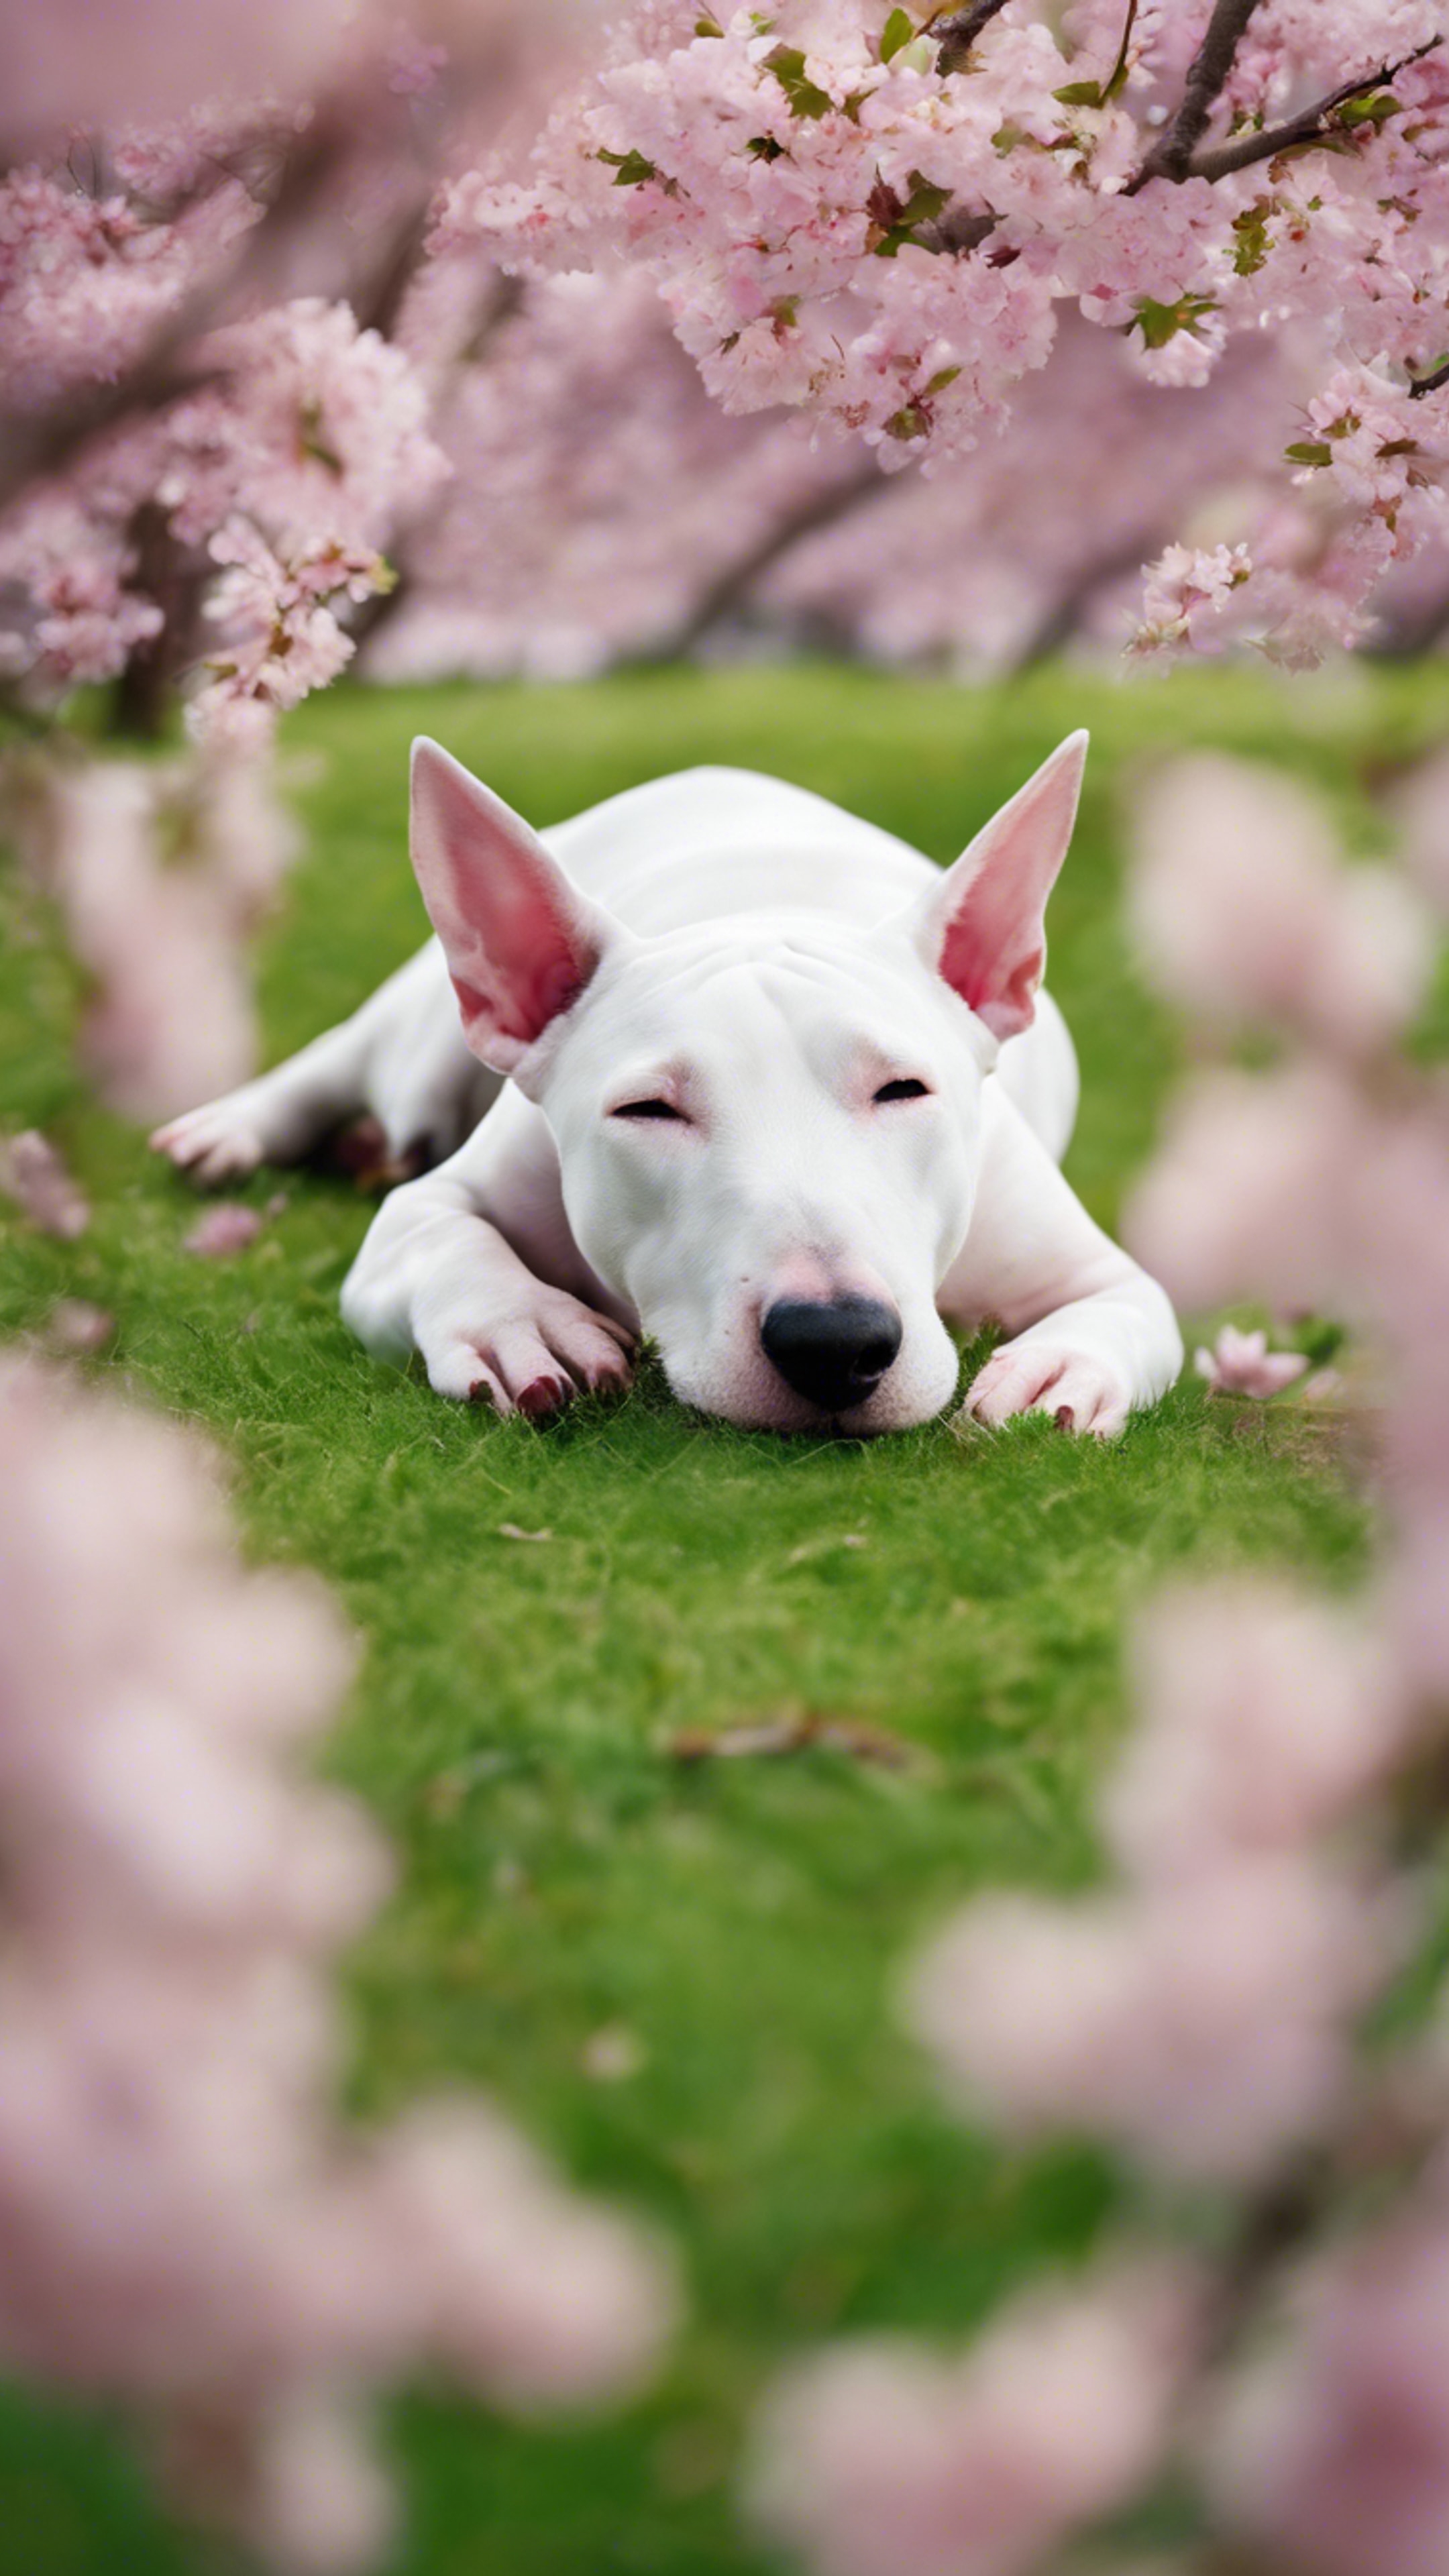 A Bull Terrier curled into a ball, sleeping in a bright green city park at the base of a cherry blossom tree. 牆紙[3df408a3b3f7480298db]